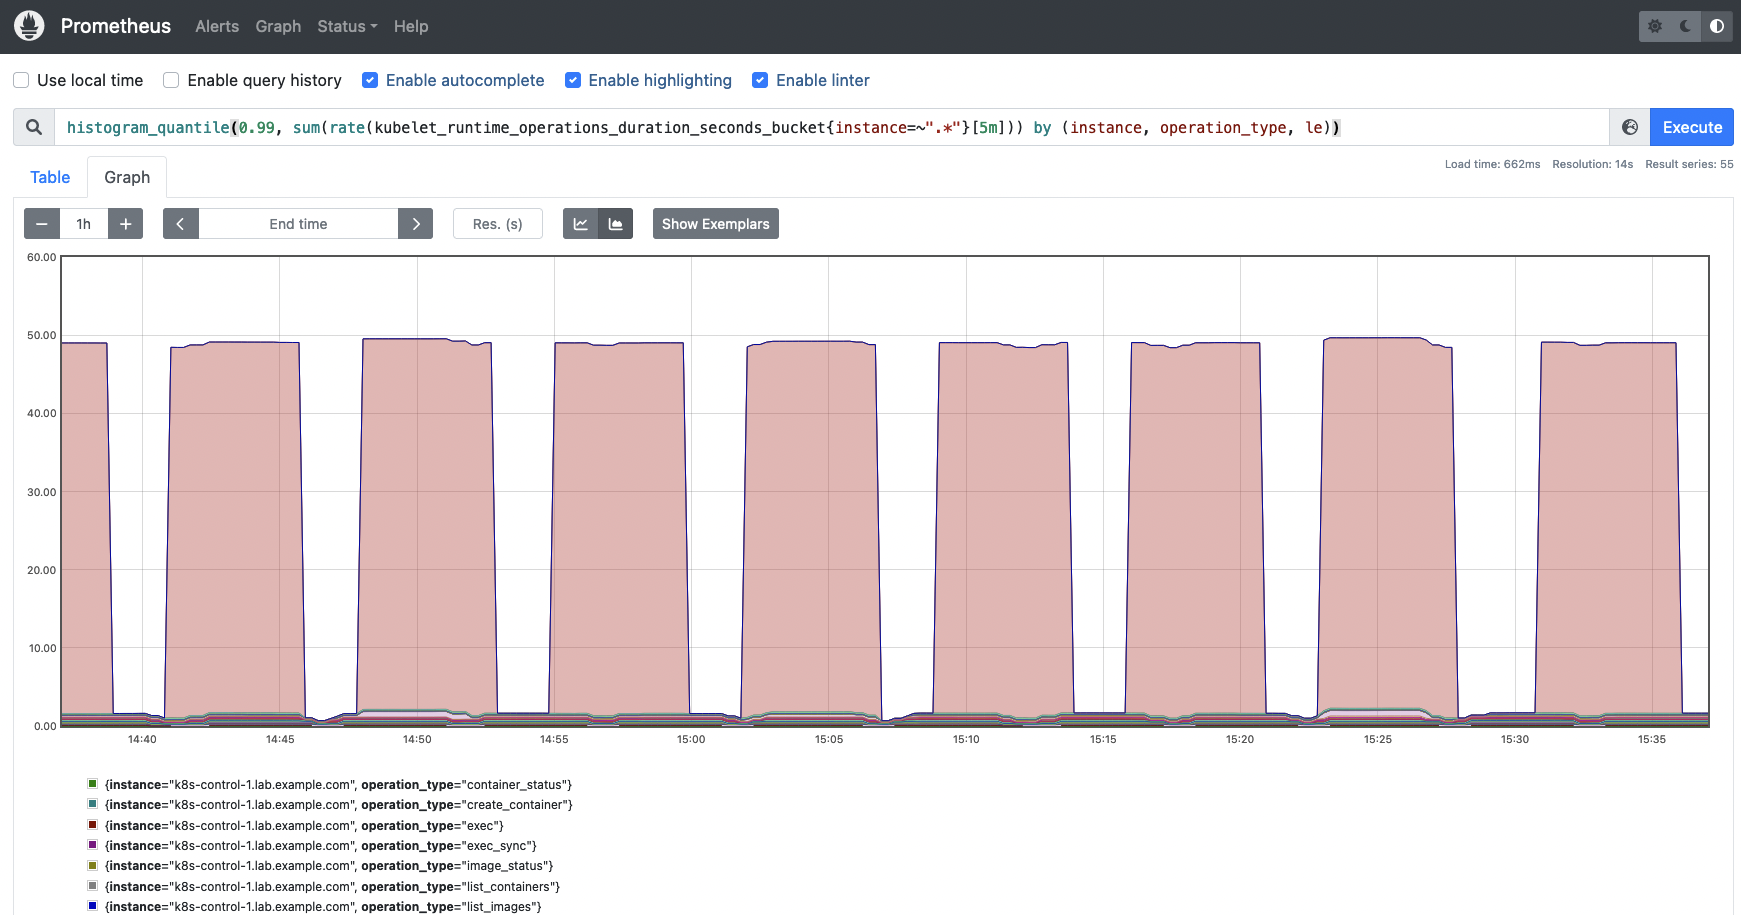 Use this query to show the 99th percentile of Kubelet runtime operations duration